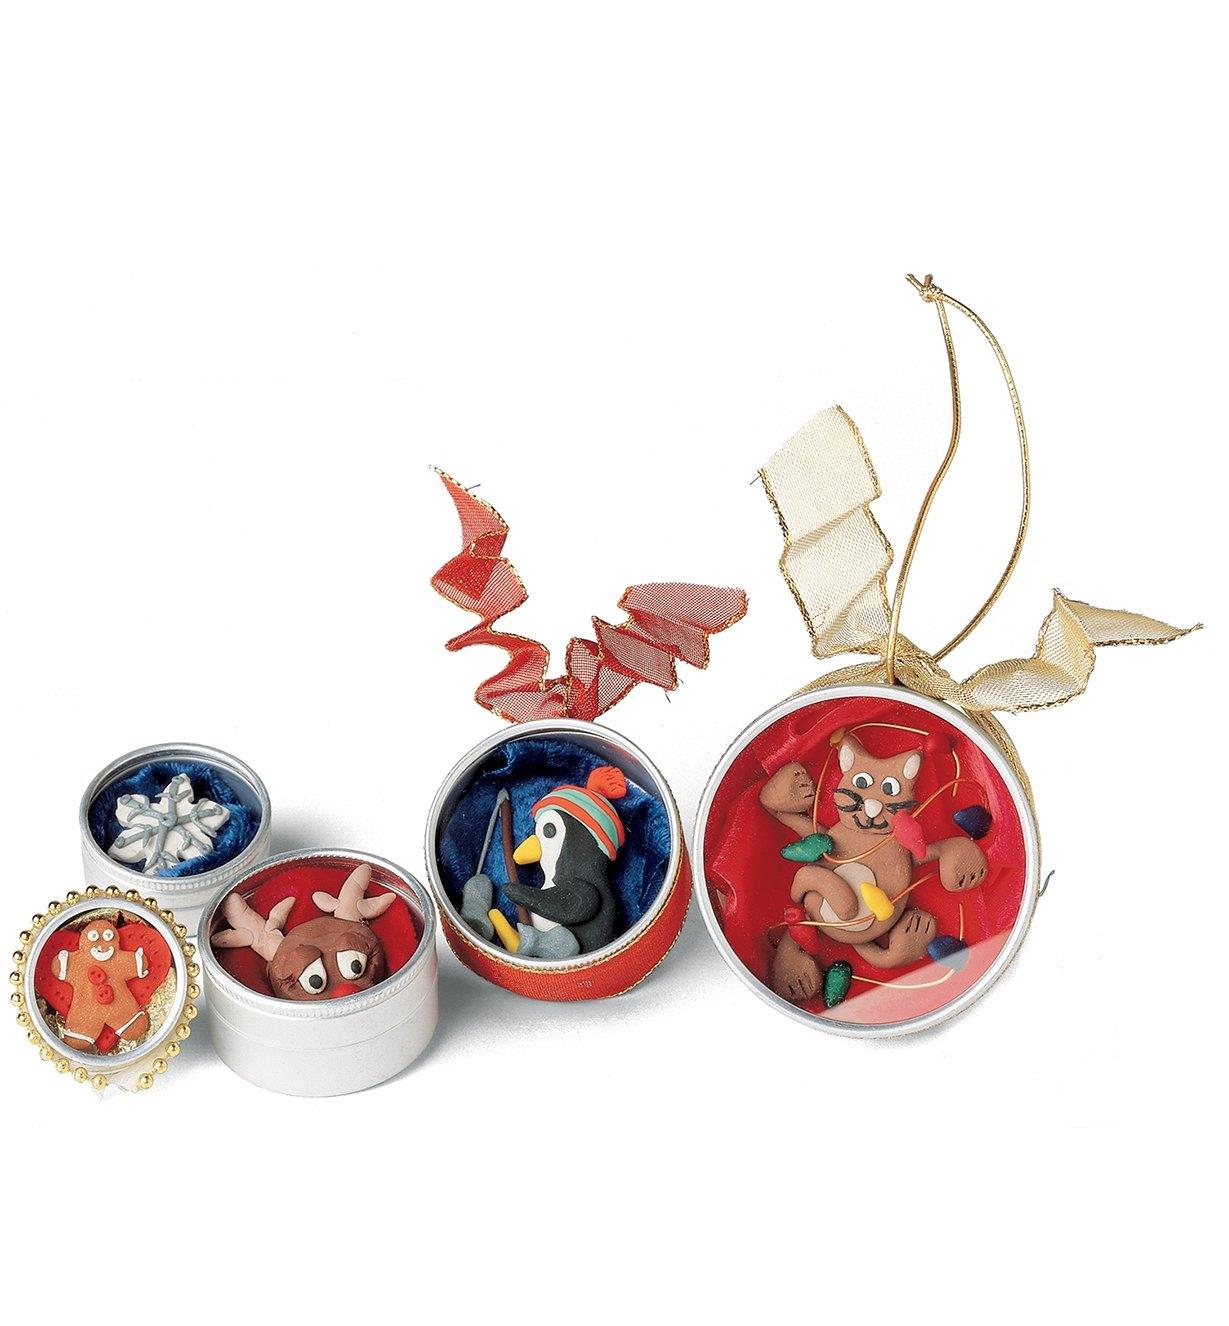 Several holiday ornaments made with polymer clay figures inside watchmaker's cases